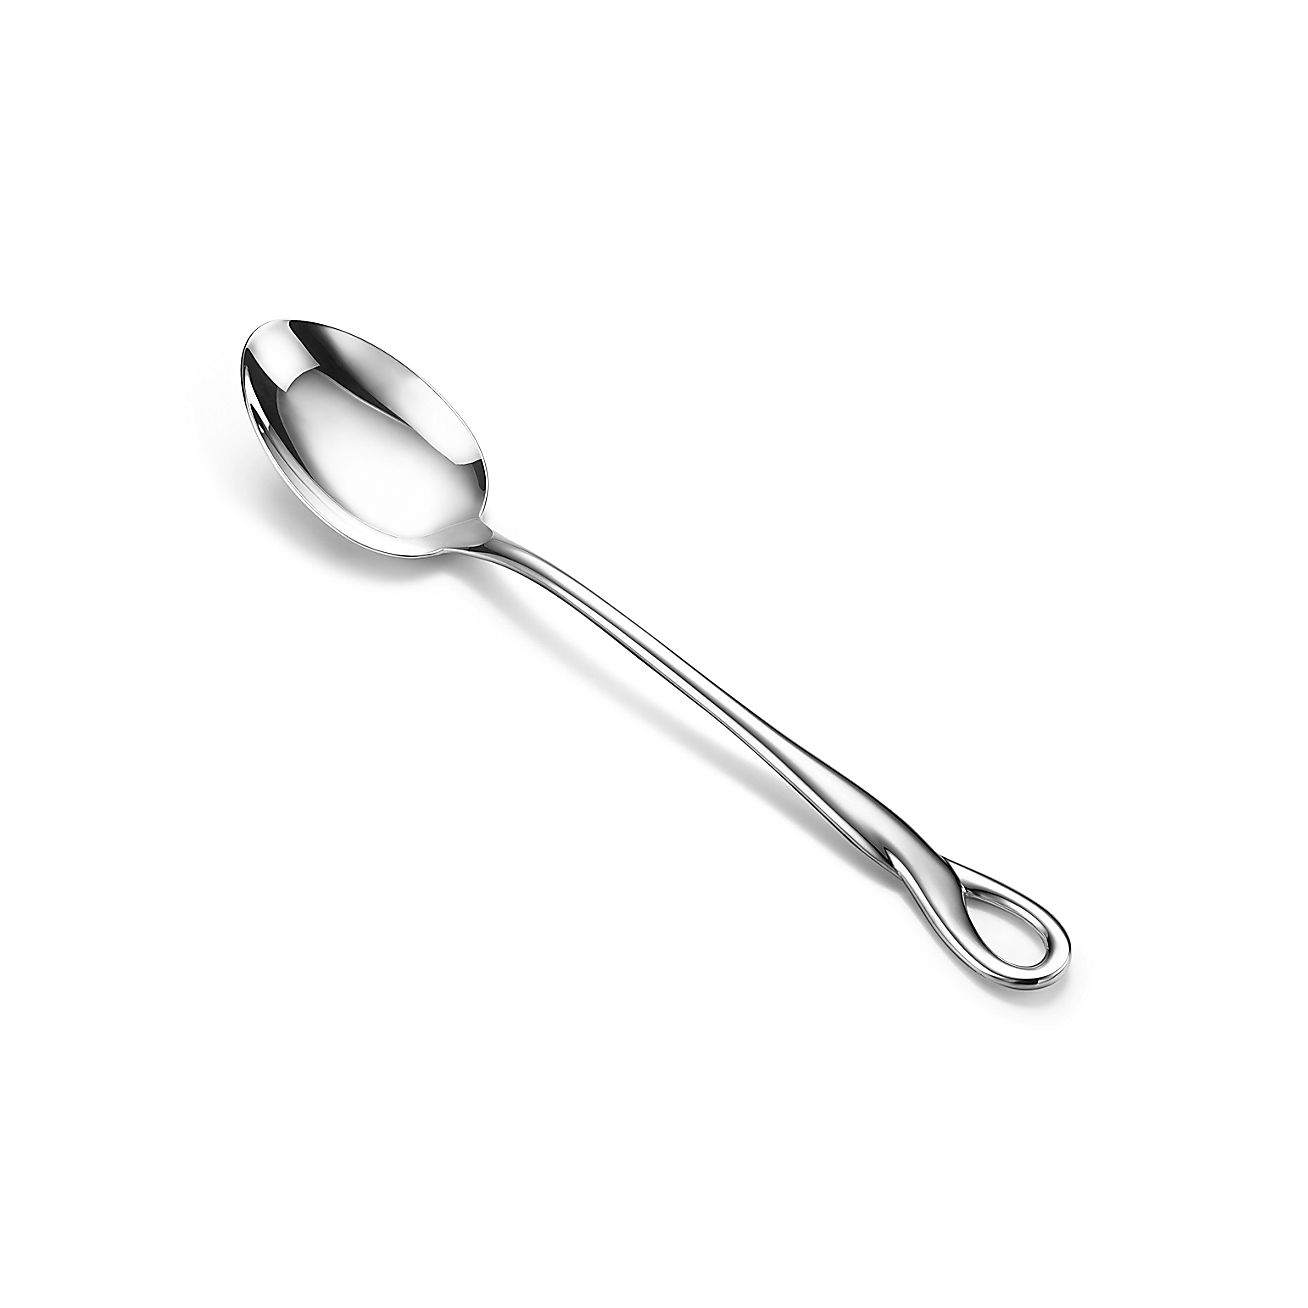 Serving Spoons